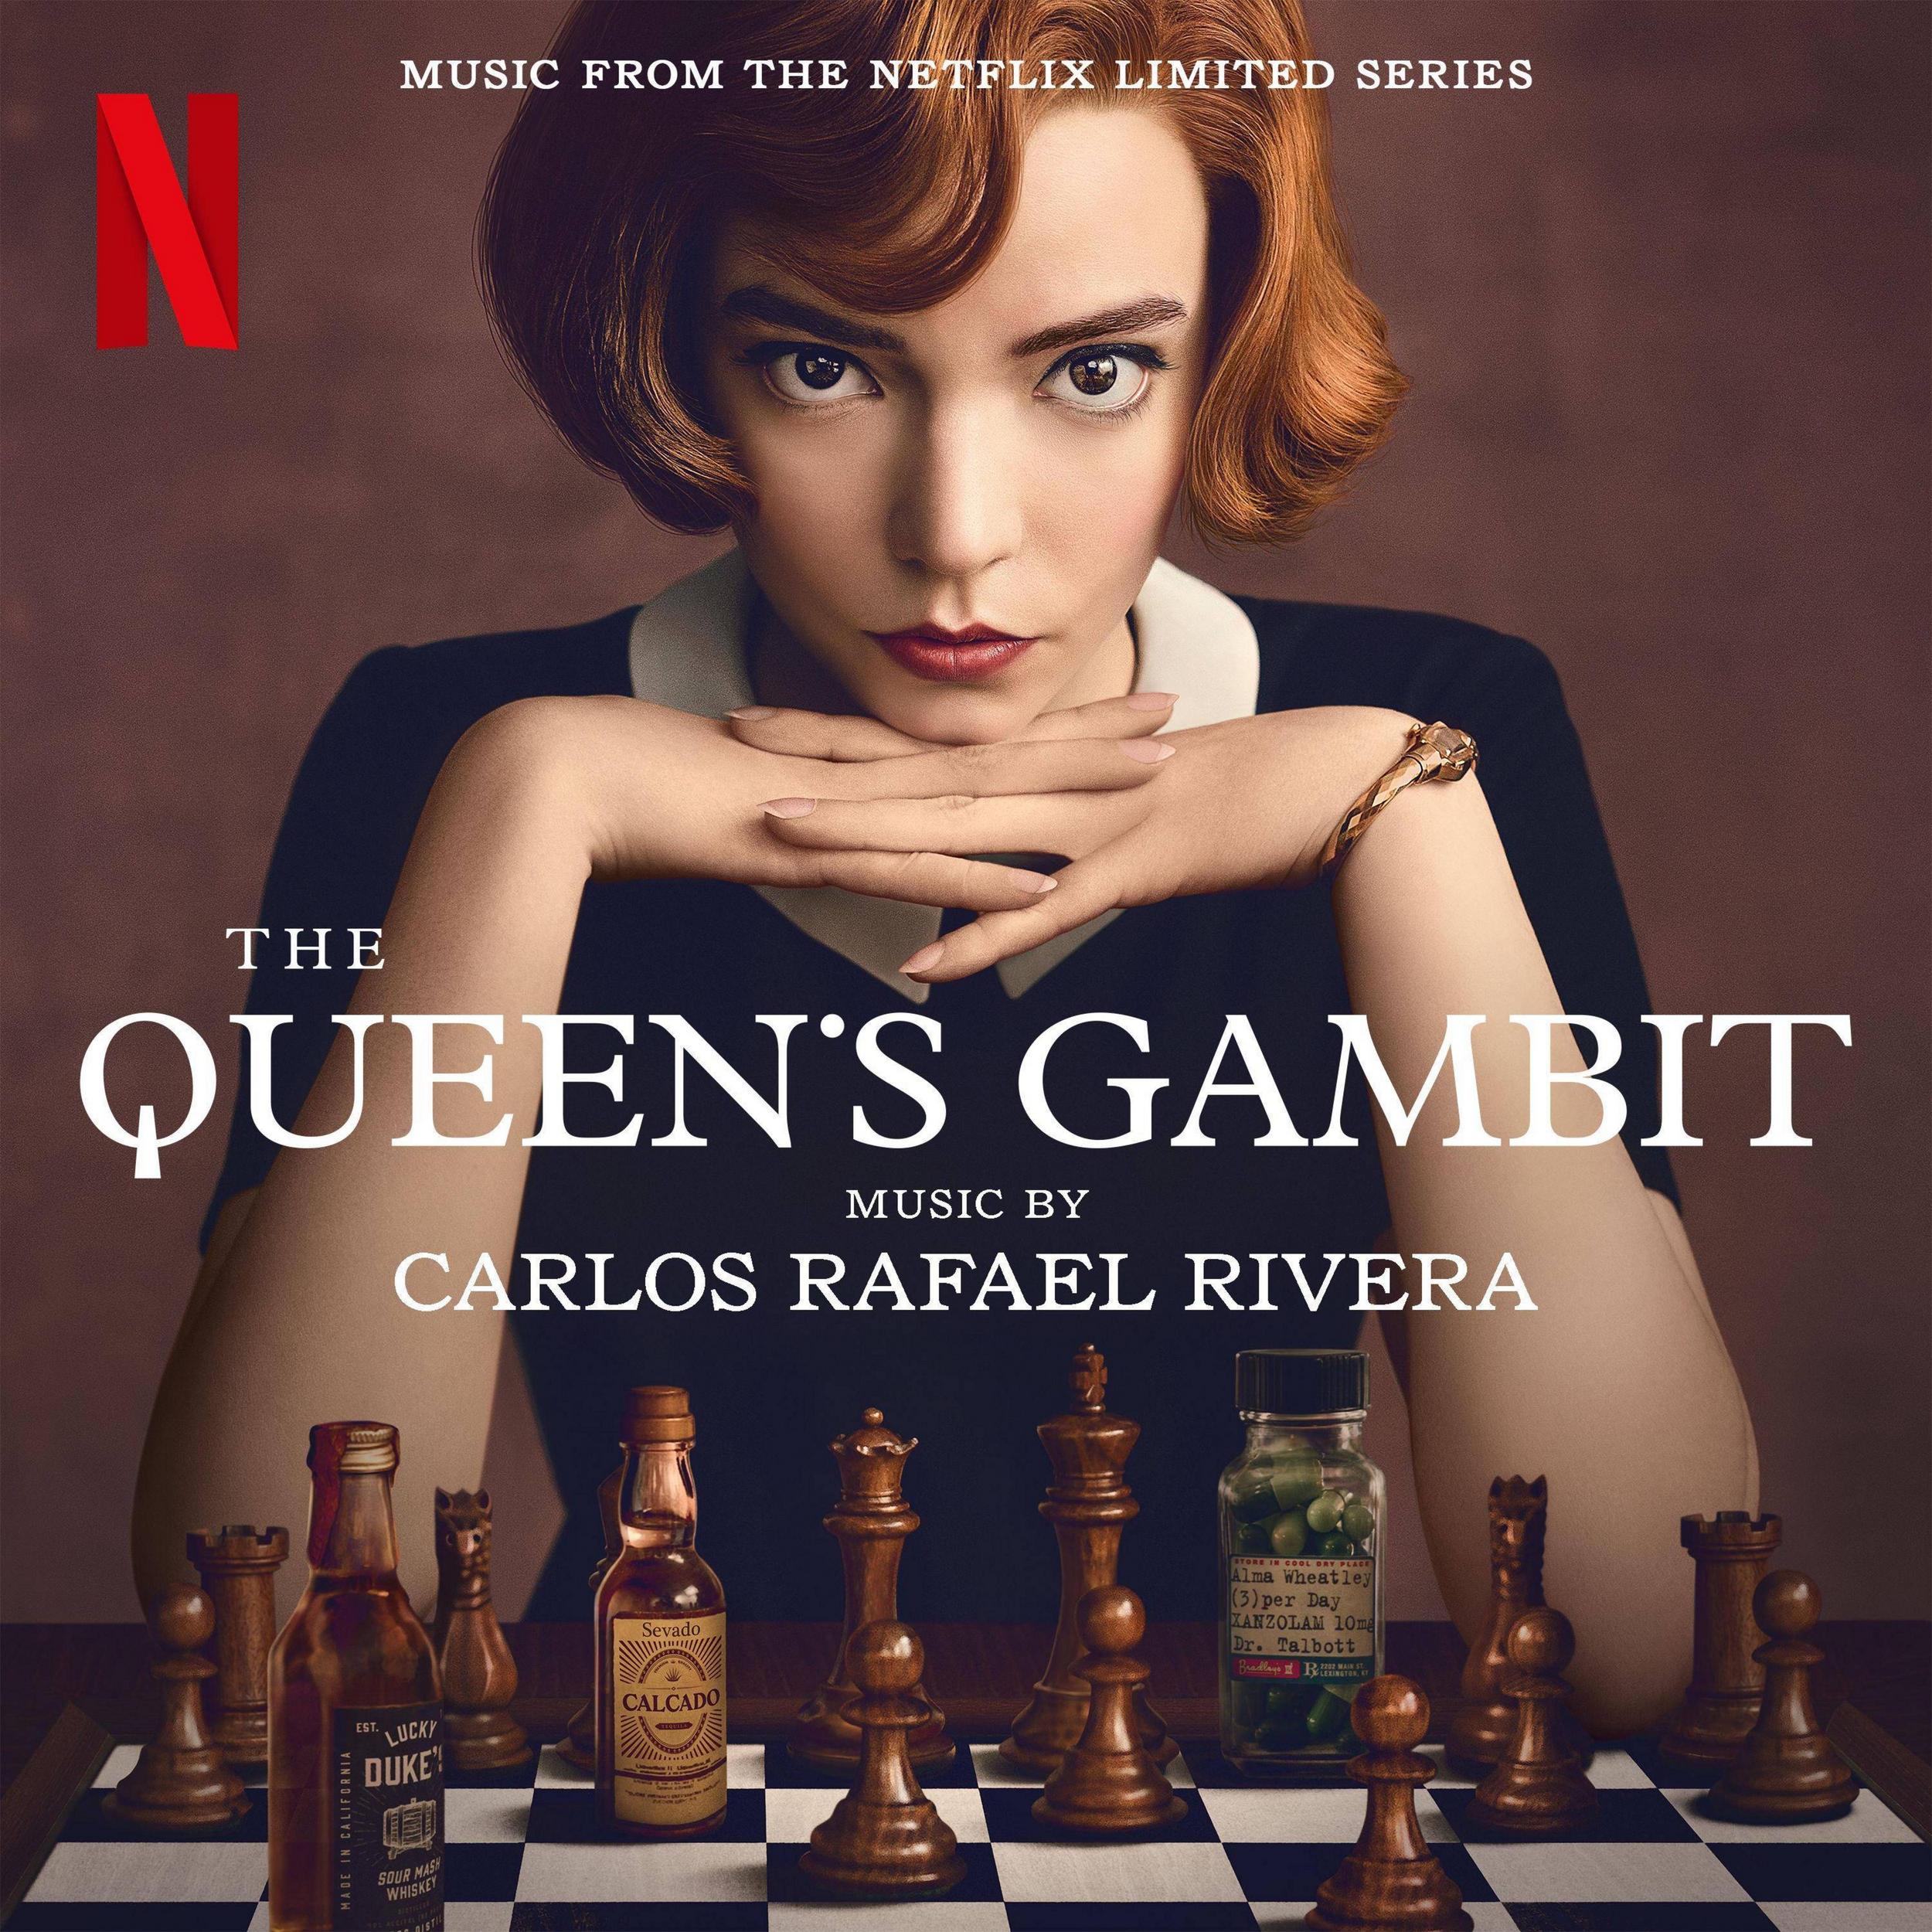 Carlos Rafael Rivera - The Queen’s Gambit (Music from the Netflix Limited Series) (2020) [FLAC 24bit/48kHz]